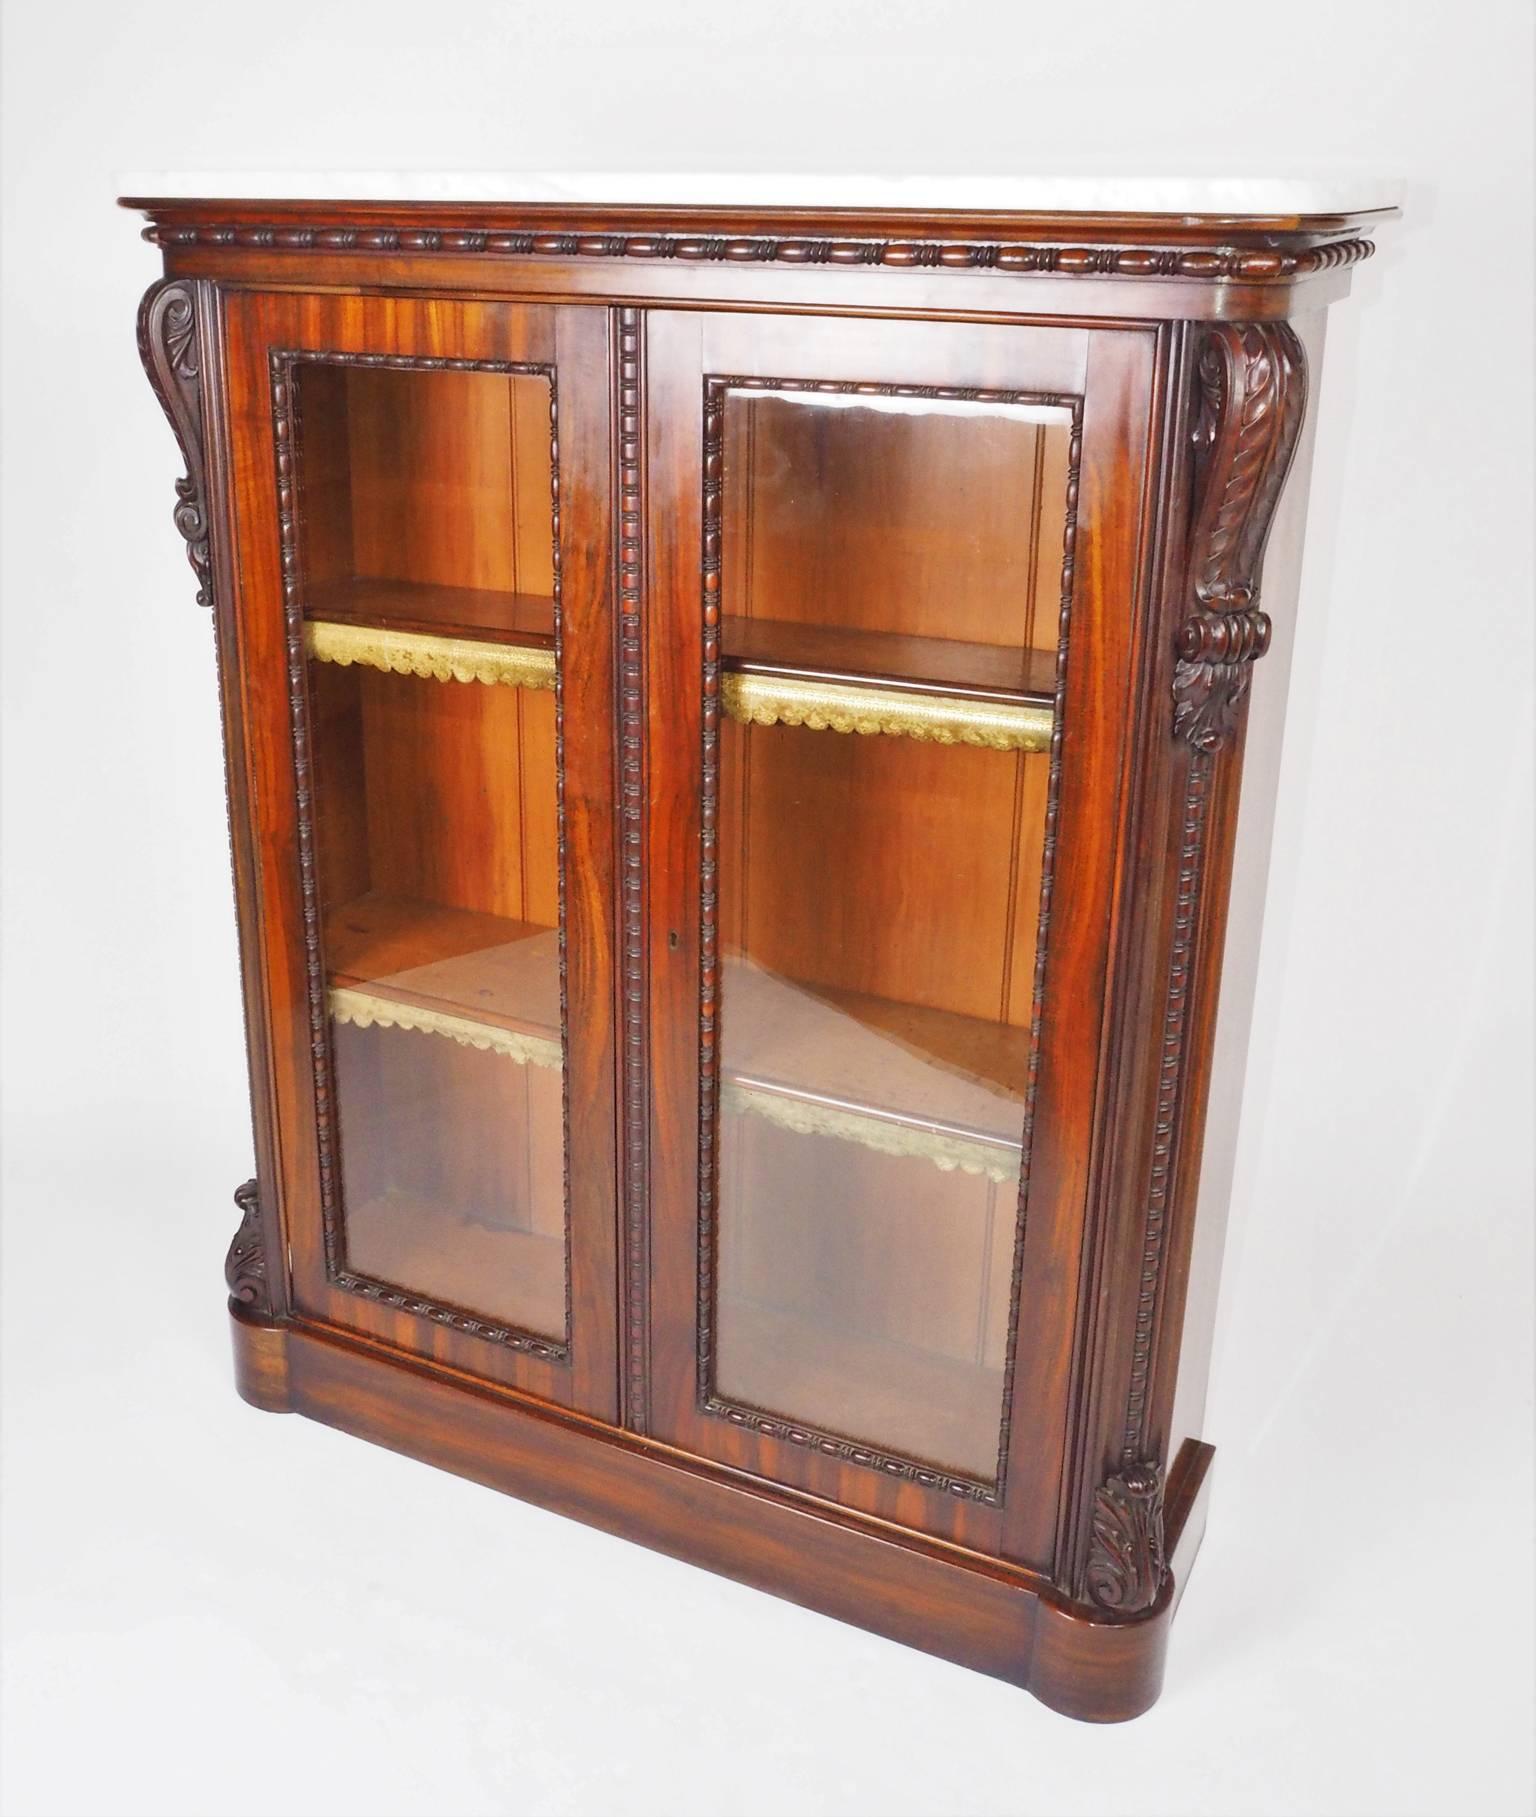 Attributed to Gillows of Lancaster and London. The elaborate beading to the
underside of the top and doors is a typical Gillows detail. Goncalo Alves, a tropical wood, was used by Gillows from July 1823 to the mid-1860s, whilst slightly cheaper in